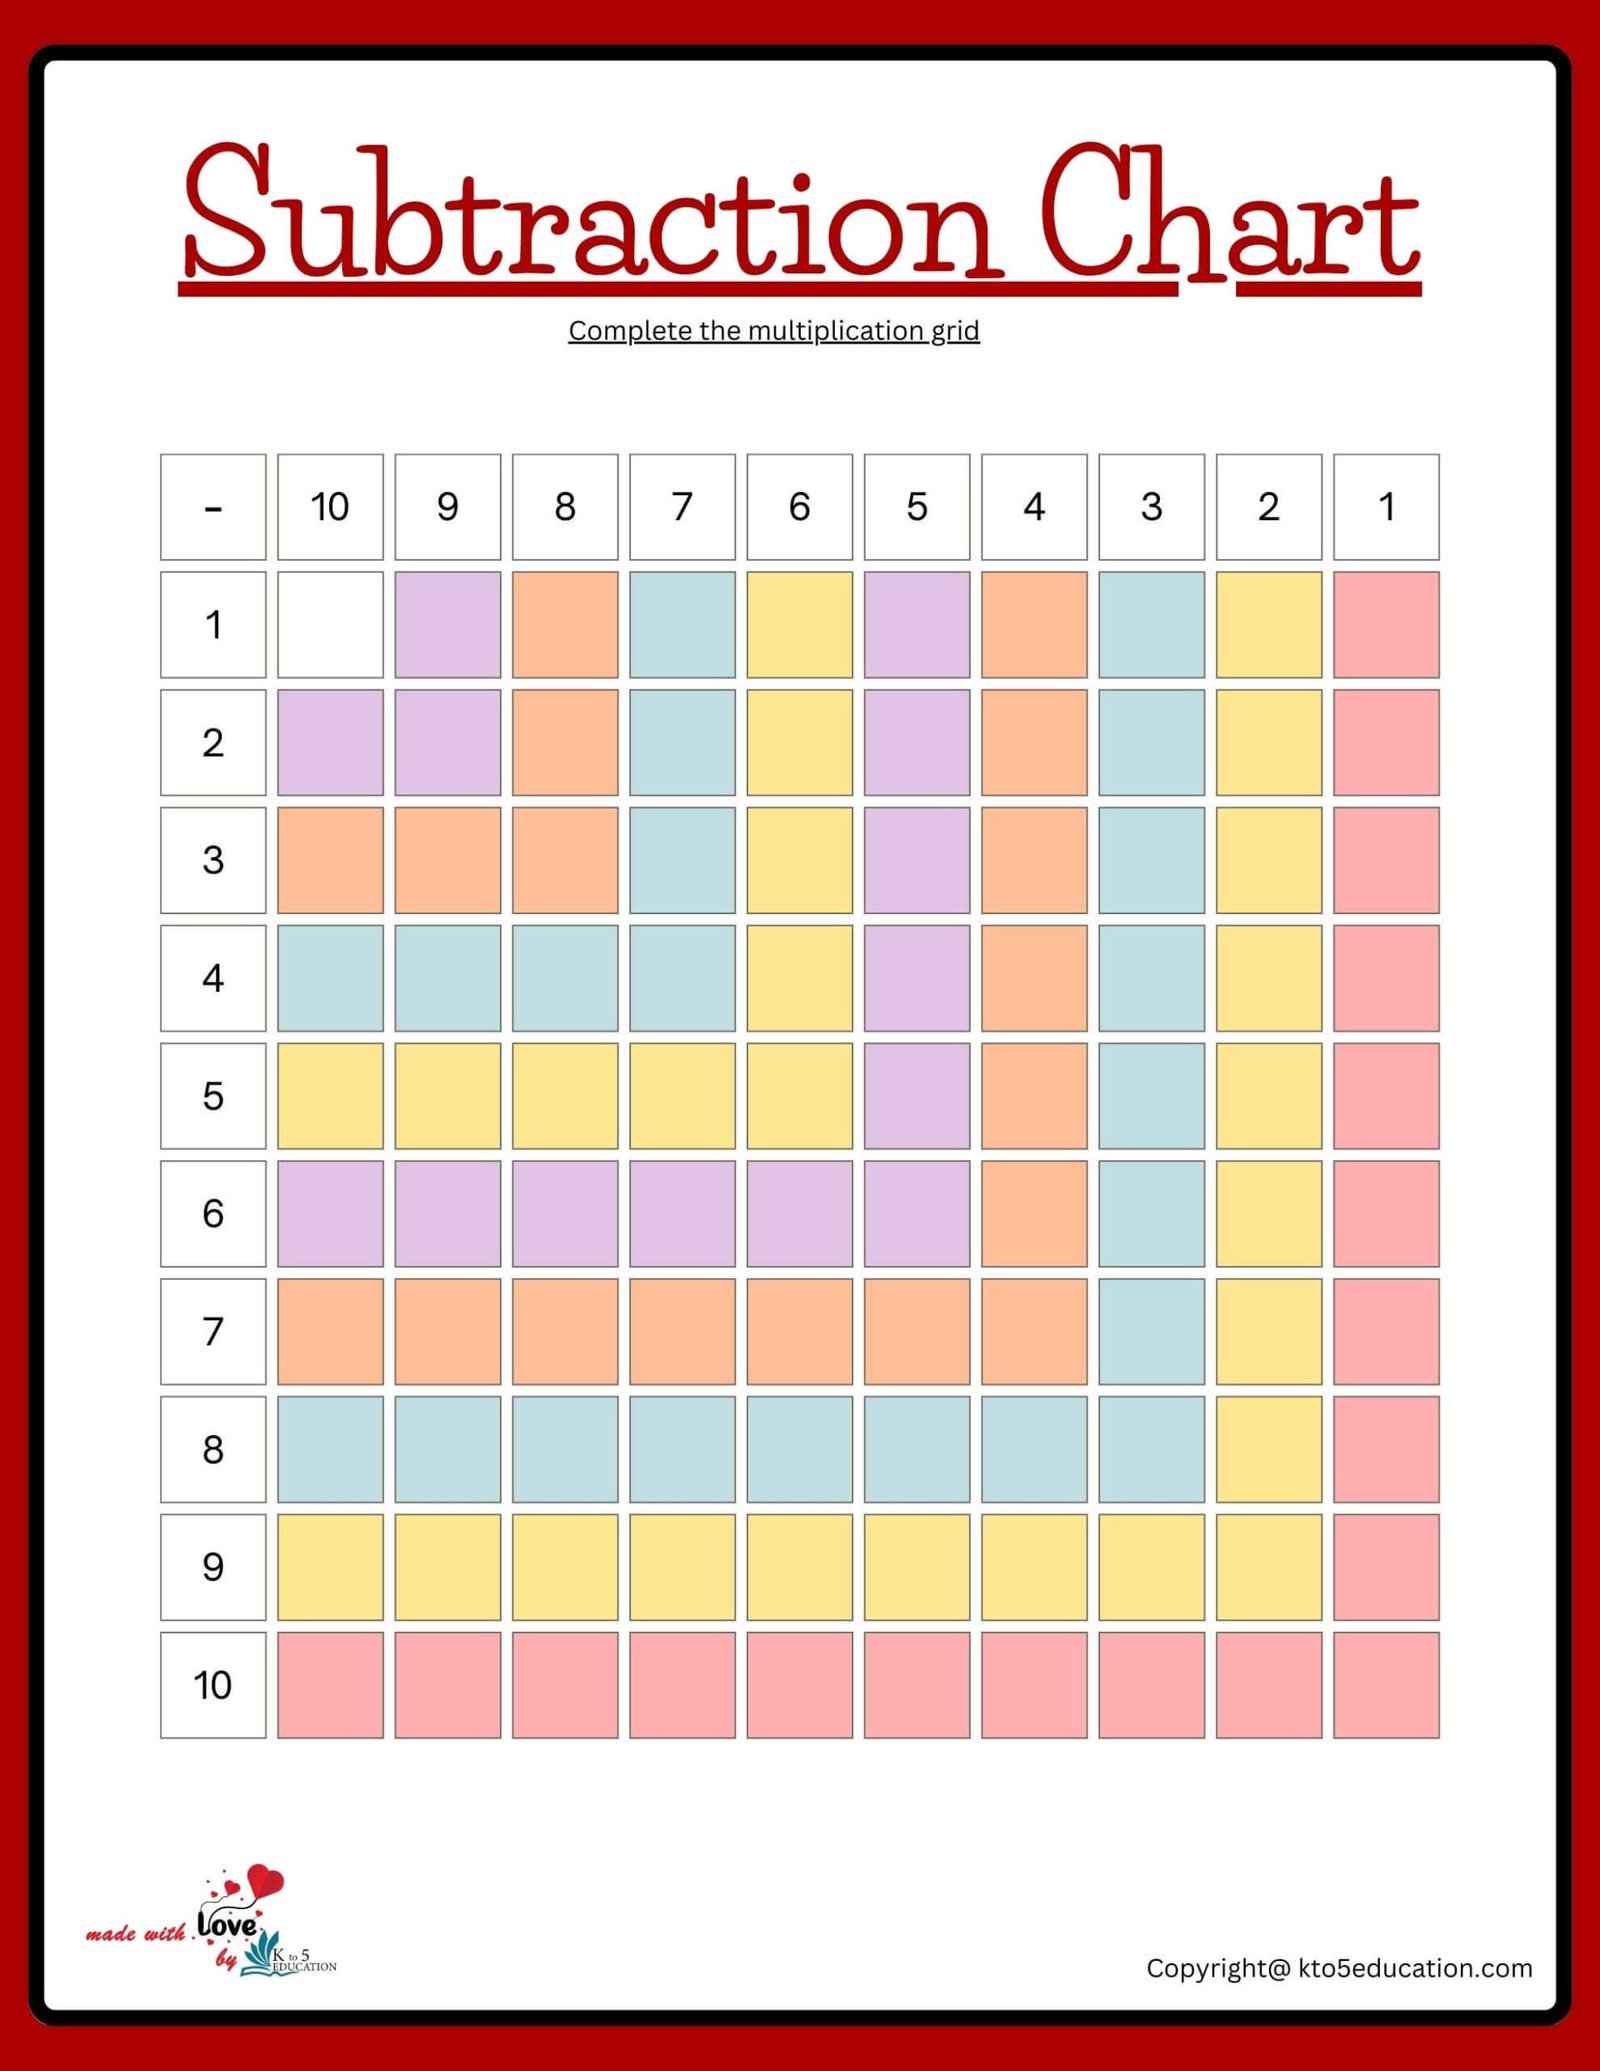 Subtraction Chart Blank Worksheet FREE Download